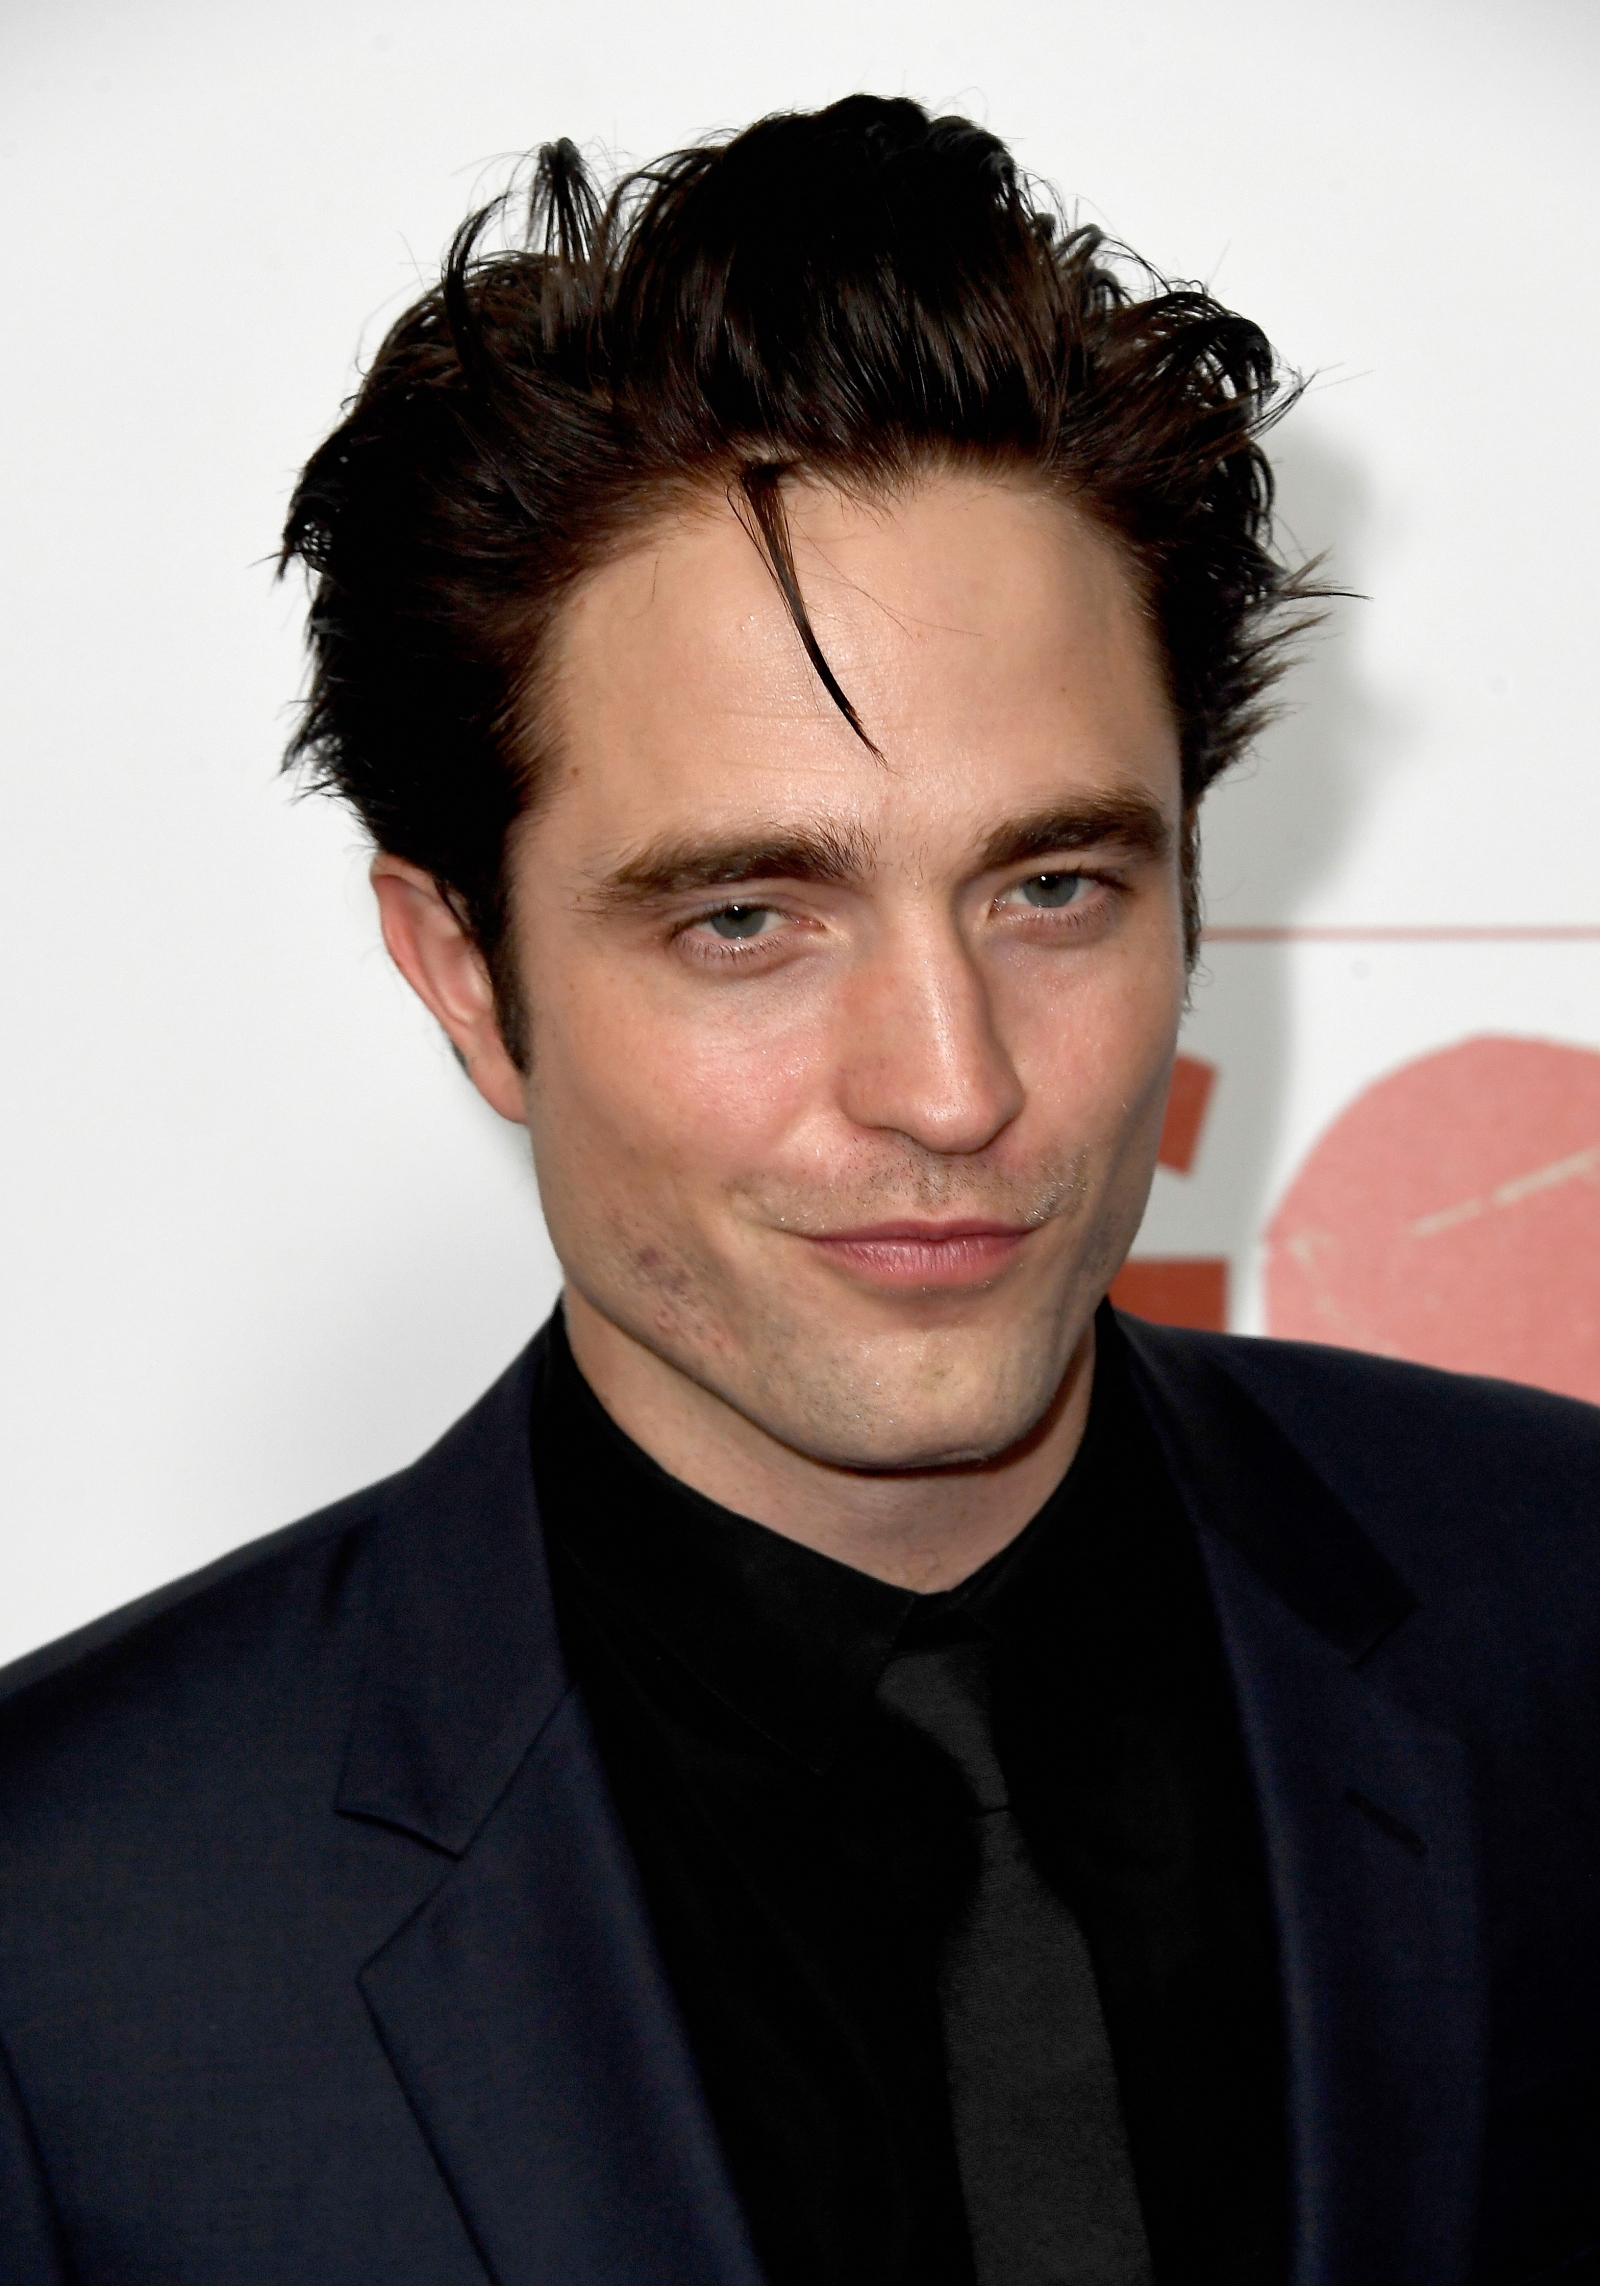 Robert Pattinson's new look as alter-ego Edward Cullen sparks new Twilight movie rumours